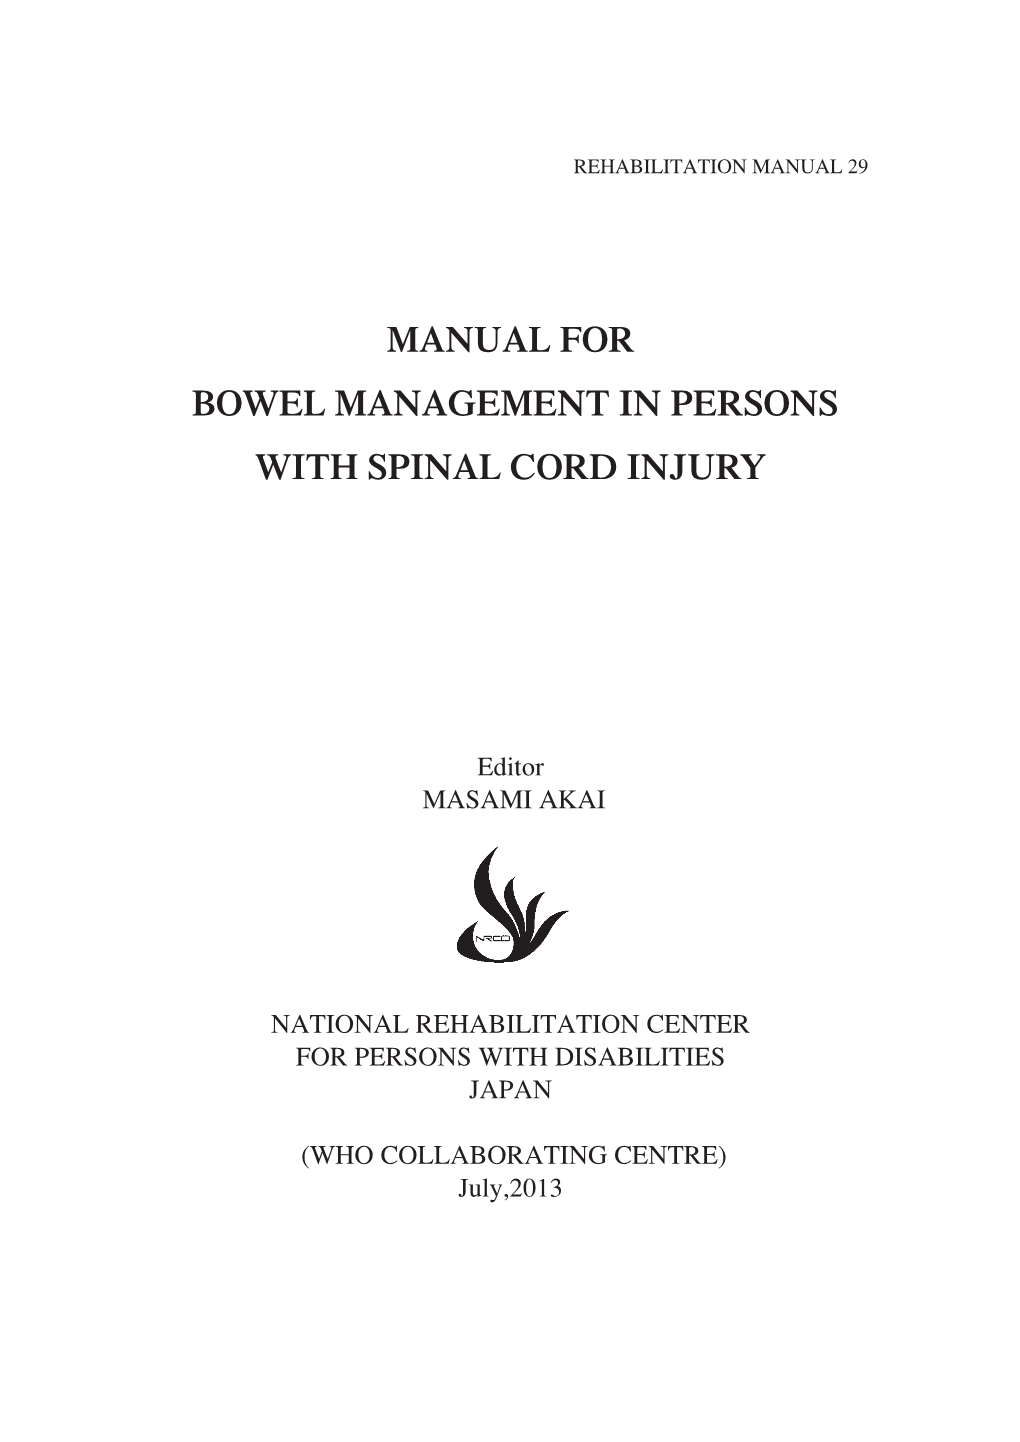 Manual for Bowel Management in Persons with Spinal Cord Injury